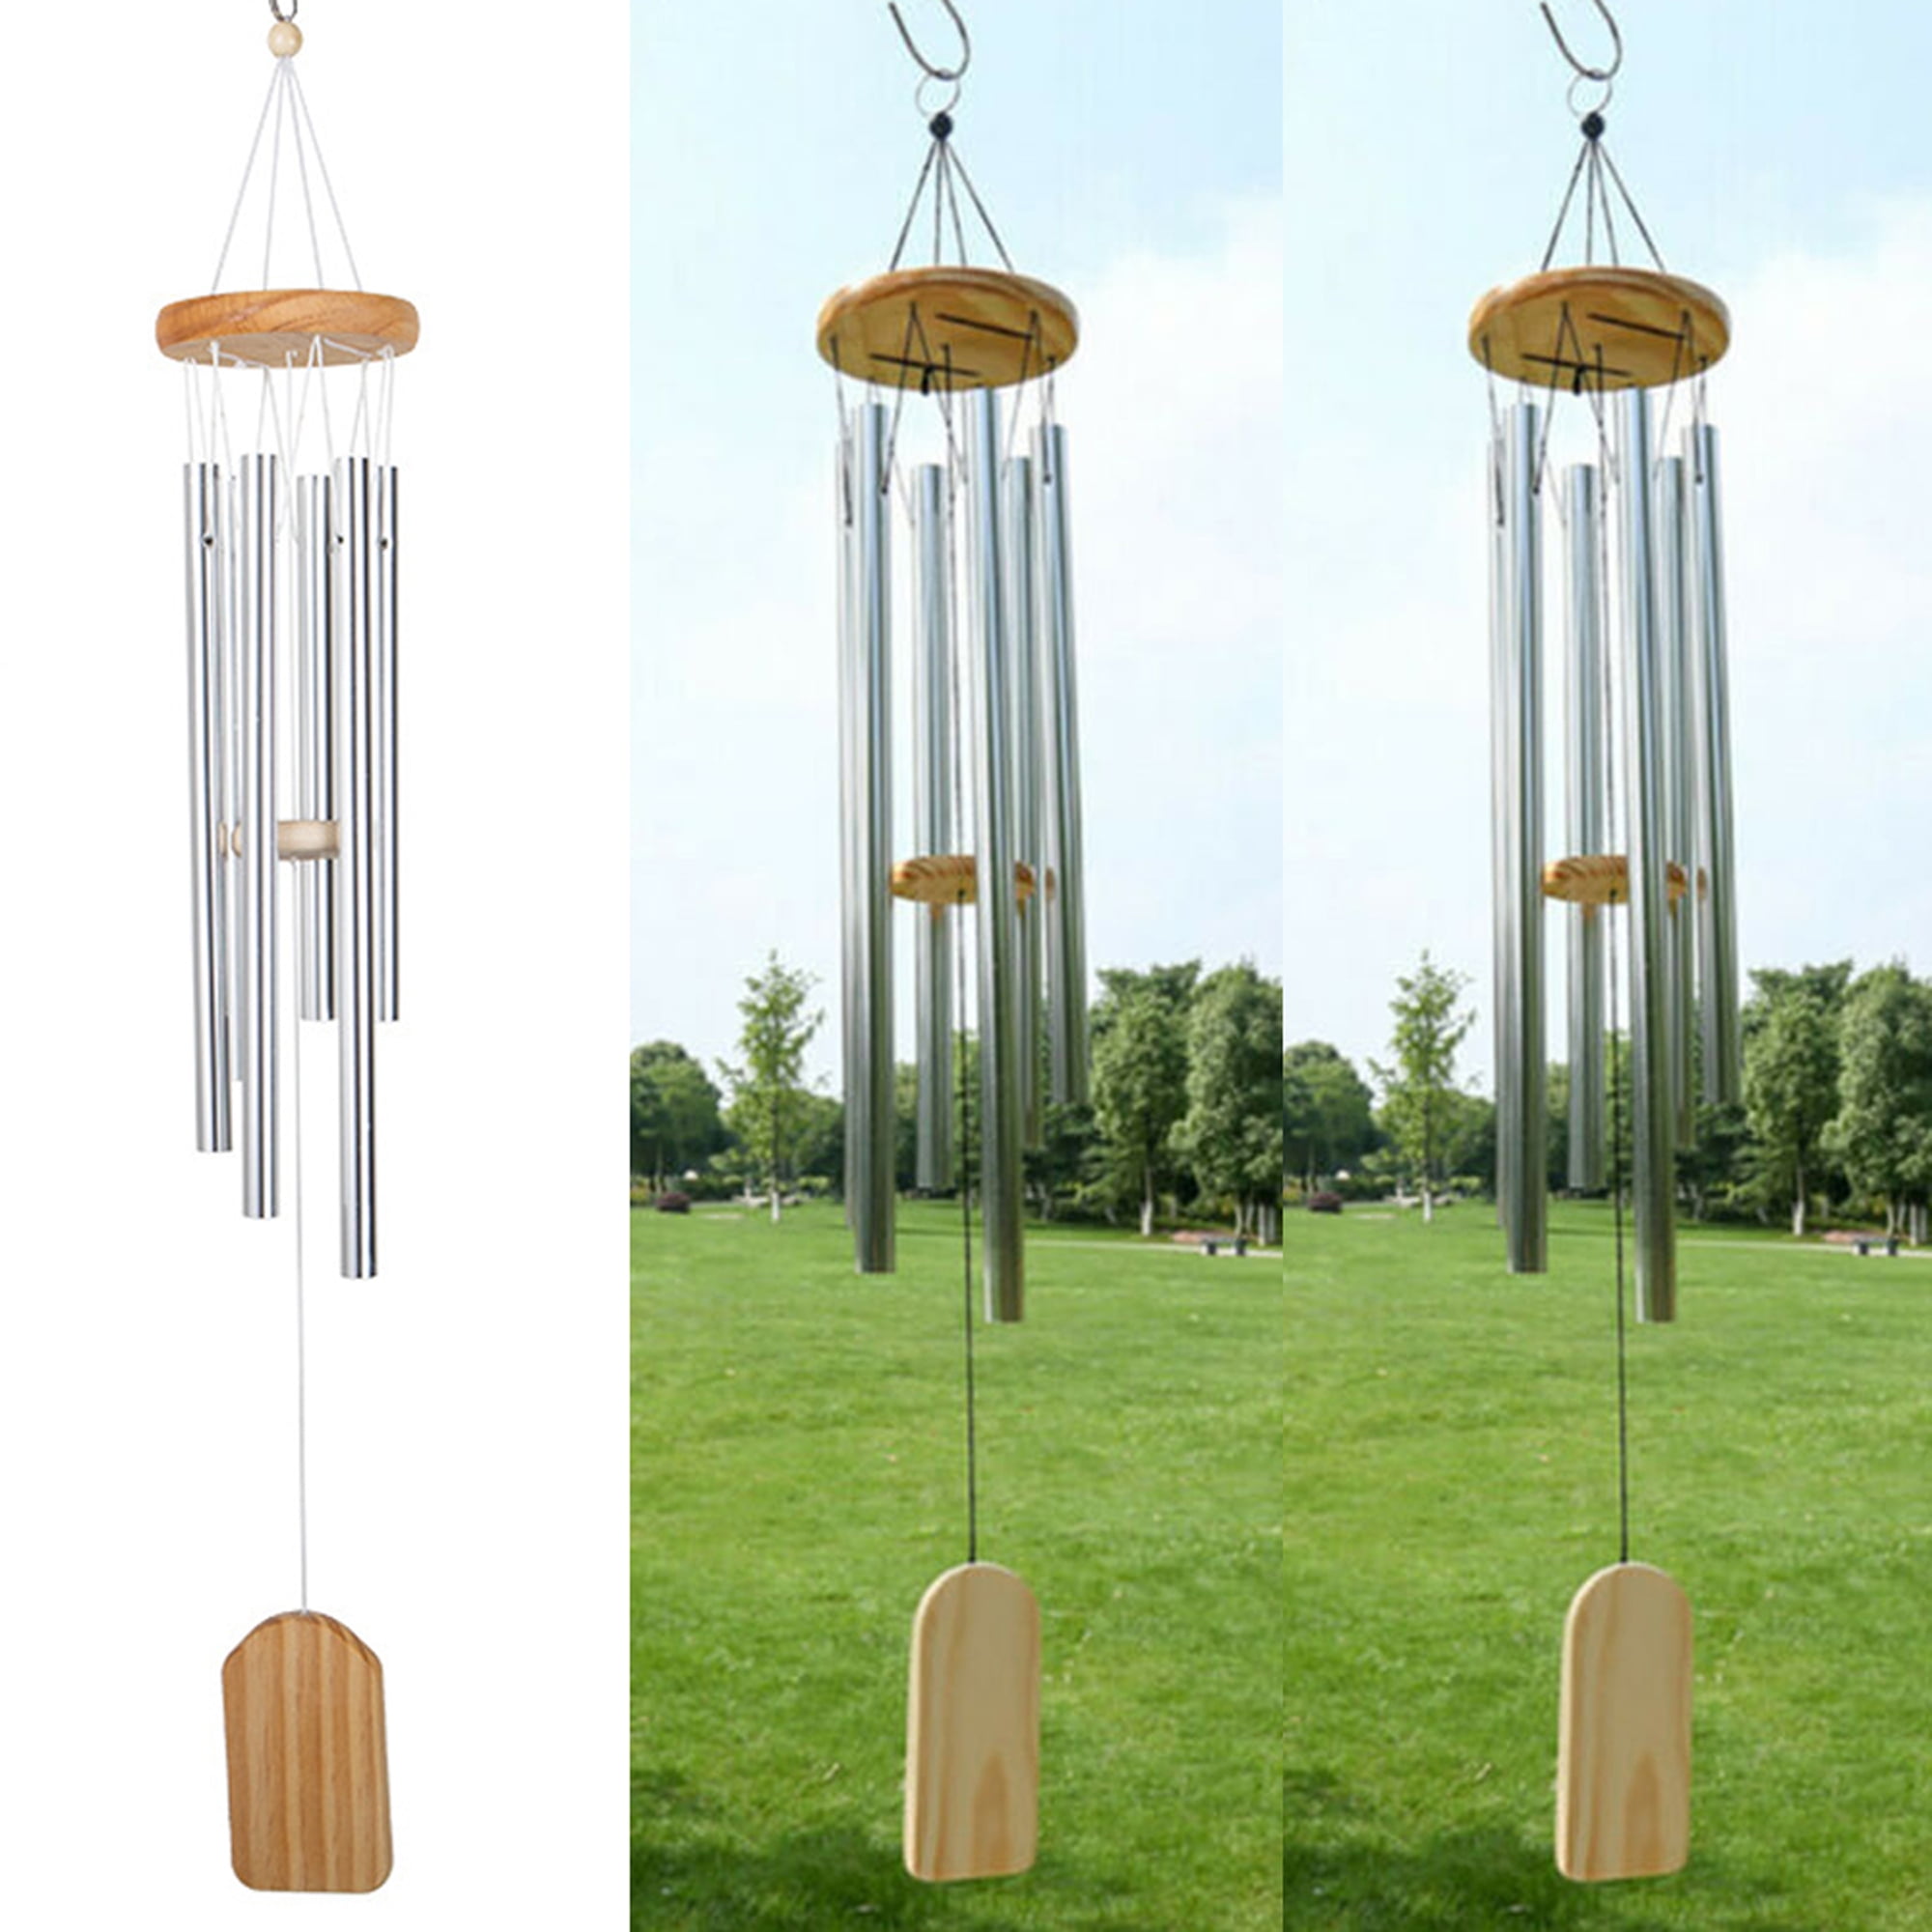 2pcs Metal Bell Tubes Large Wind Chime Home Yard Garden Outdoor Living Decor